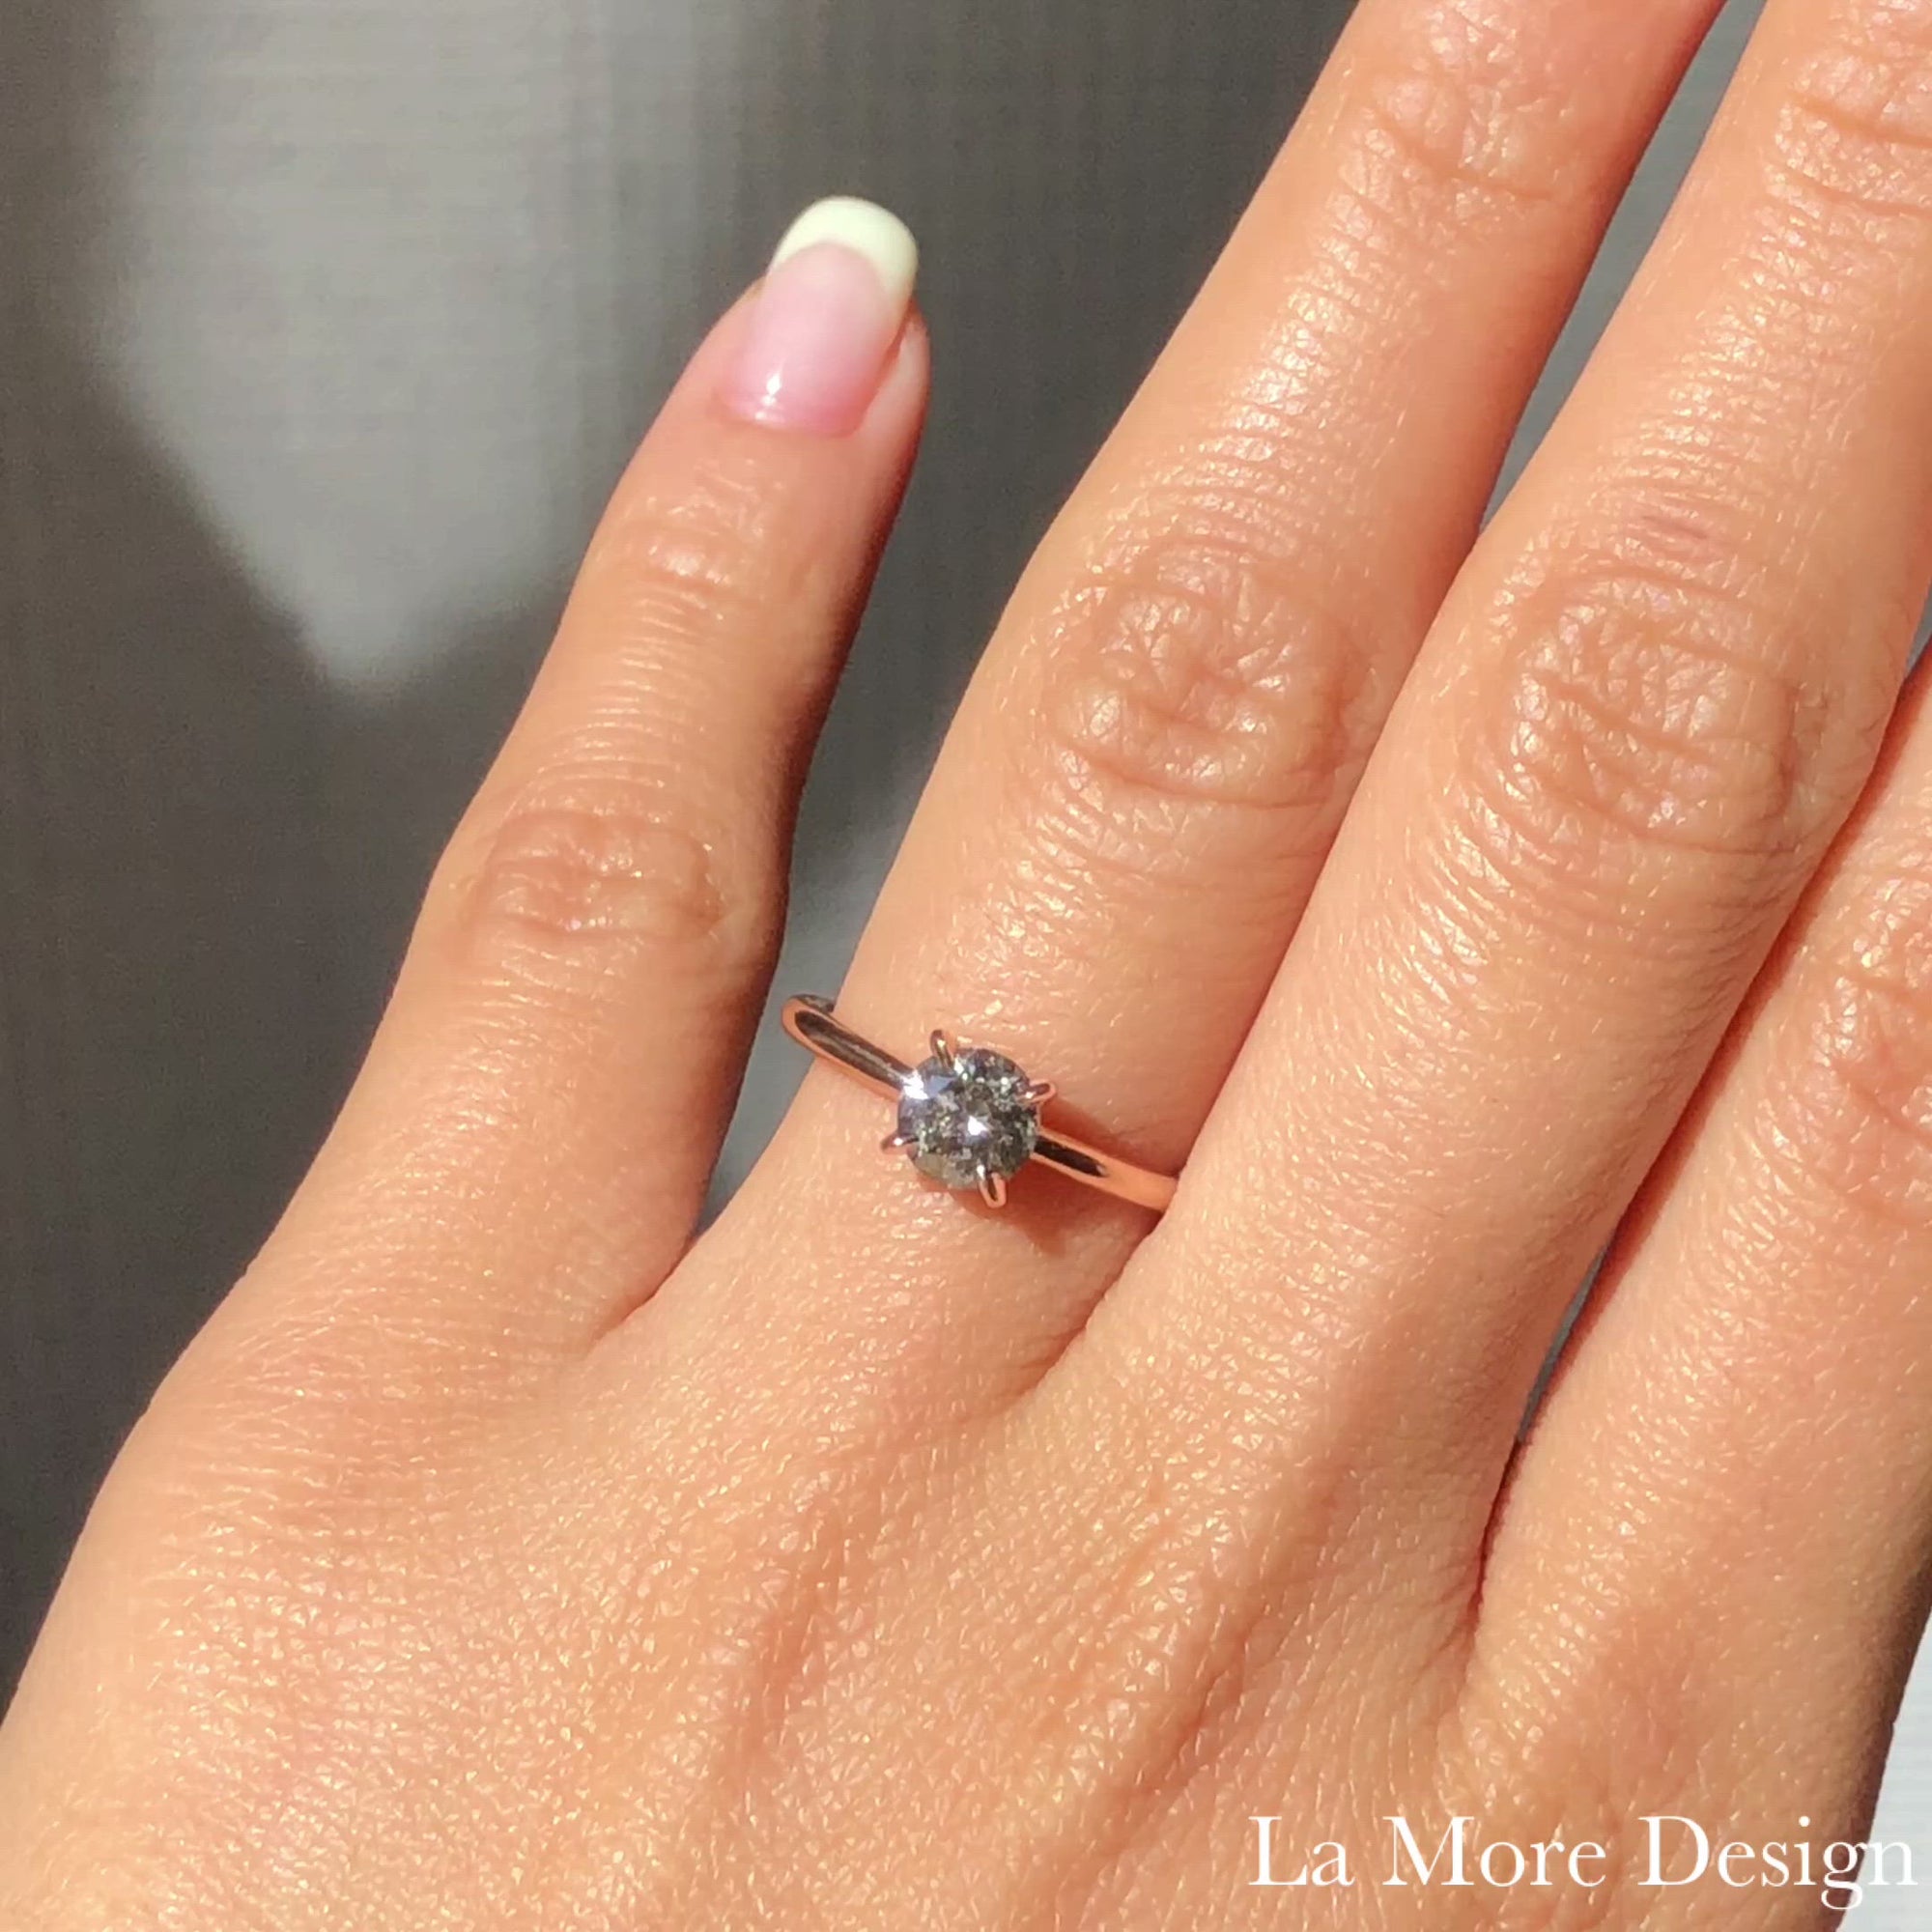 This stunningly gorgeous grey diamond engagement ring features a 1.02 carat round cut natural salt and pepper diamond set in a 14k rose gold flat set low profile solitaire ring setting that lays flat perfectly on top of your finger for comfortable wear. Adore your loved one with this one-carat diamond ring!